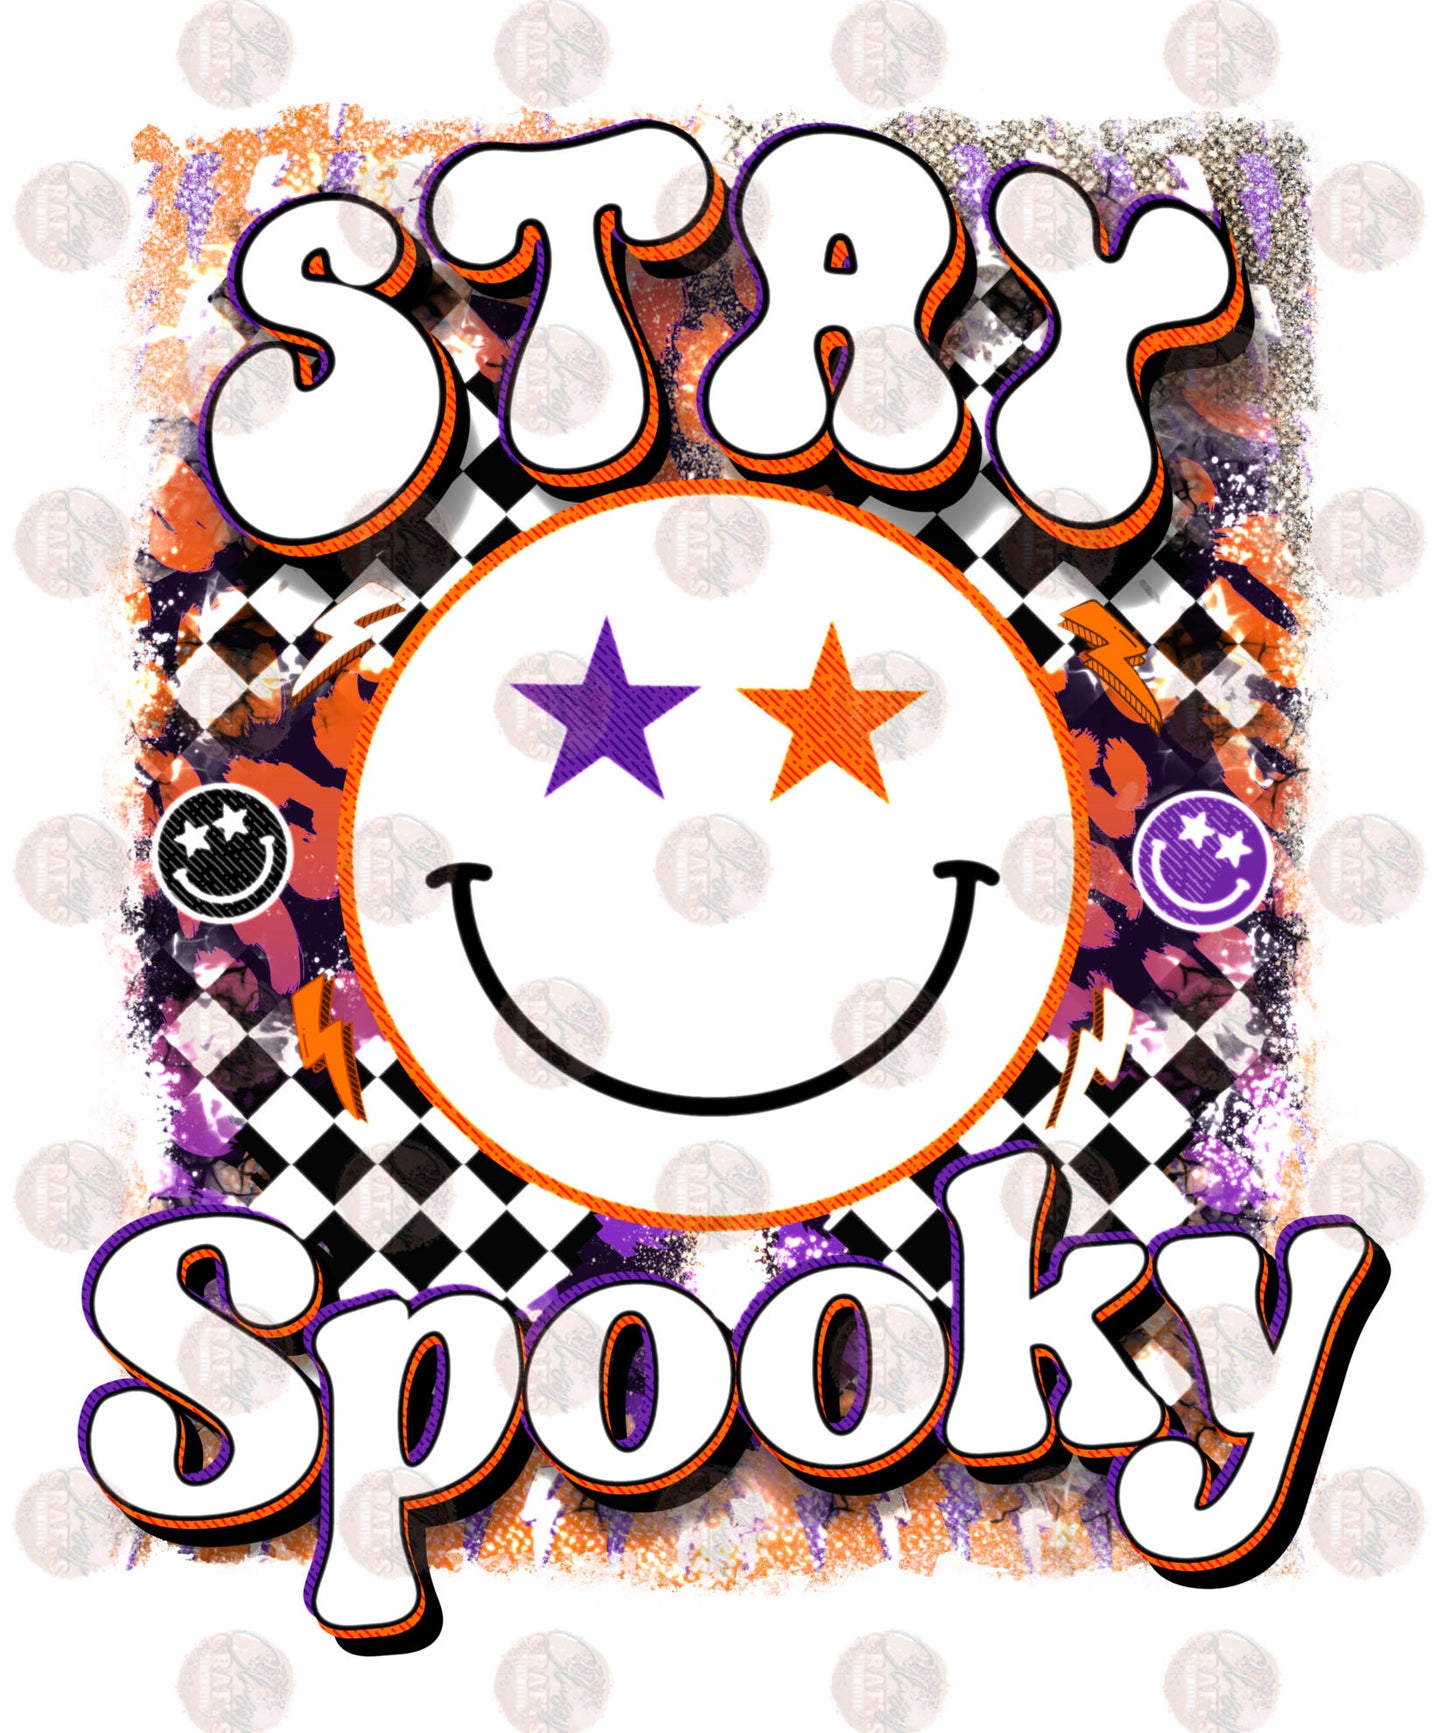 Stay Spooky - Sublimation Transfer